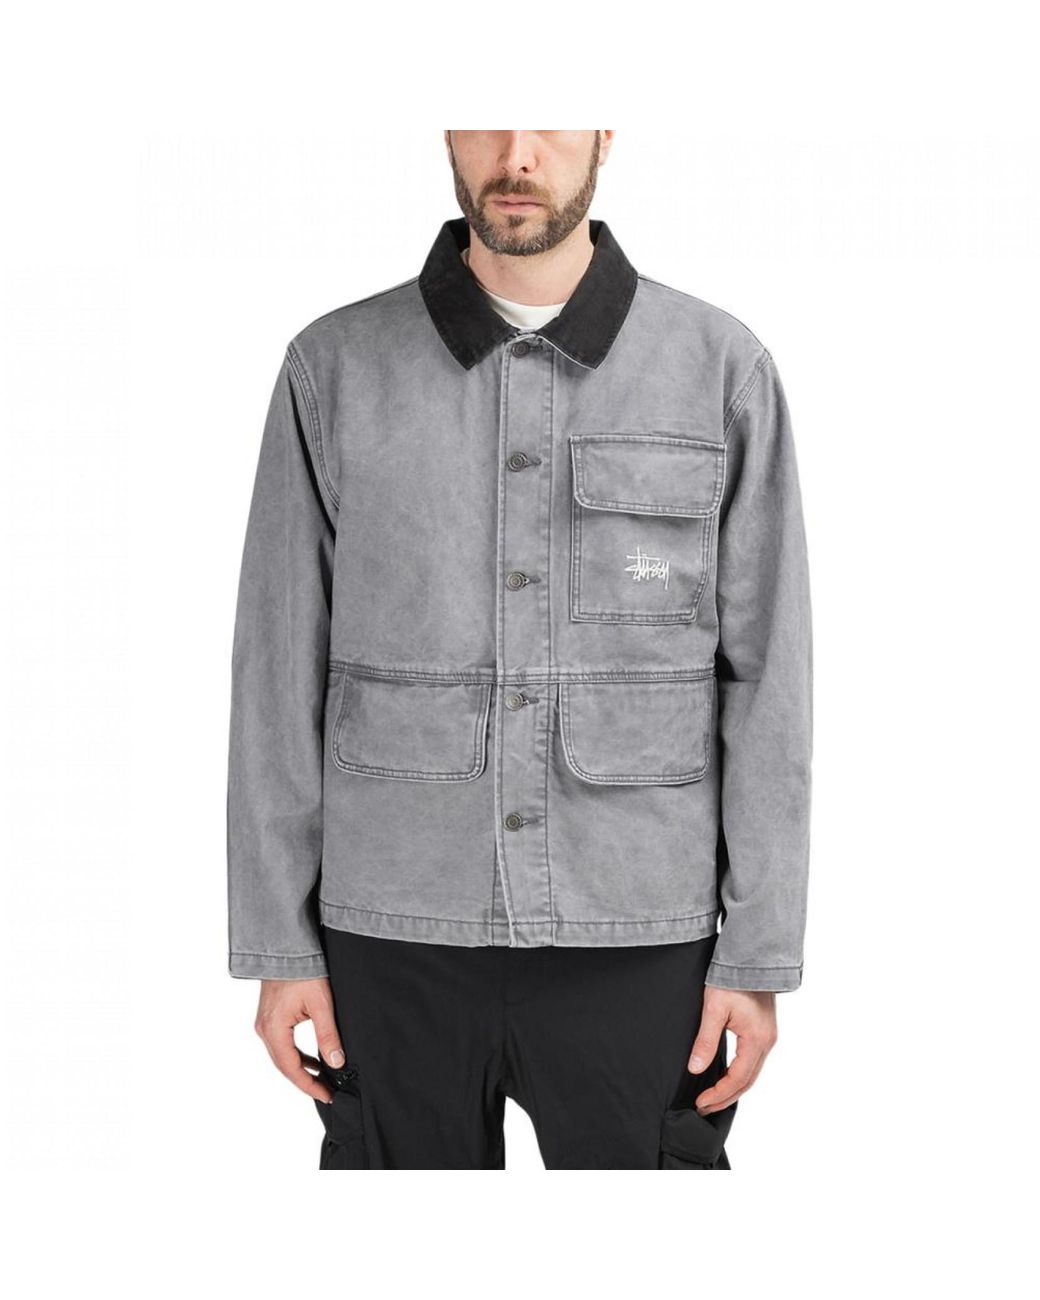 Stussy Cotton Washed Chore Jacket in Gray for Men - Lyst